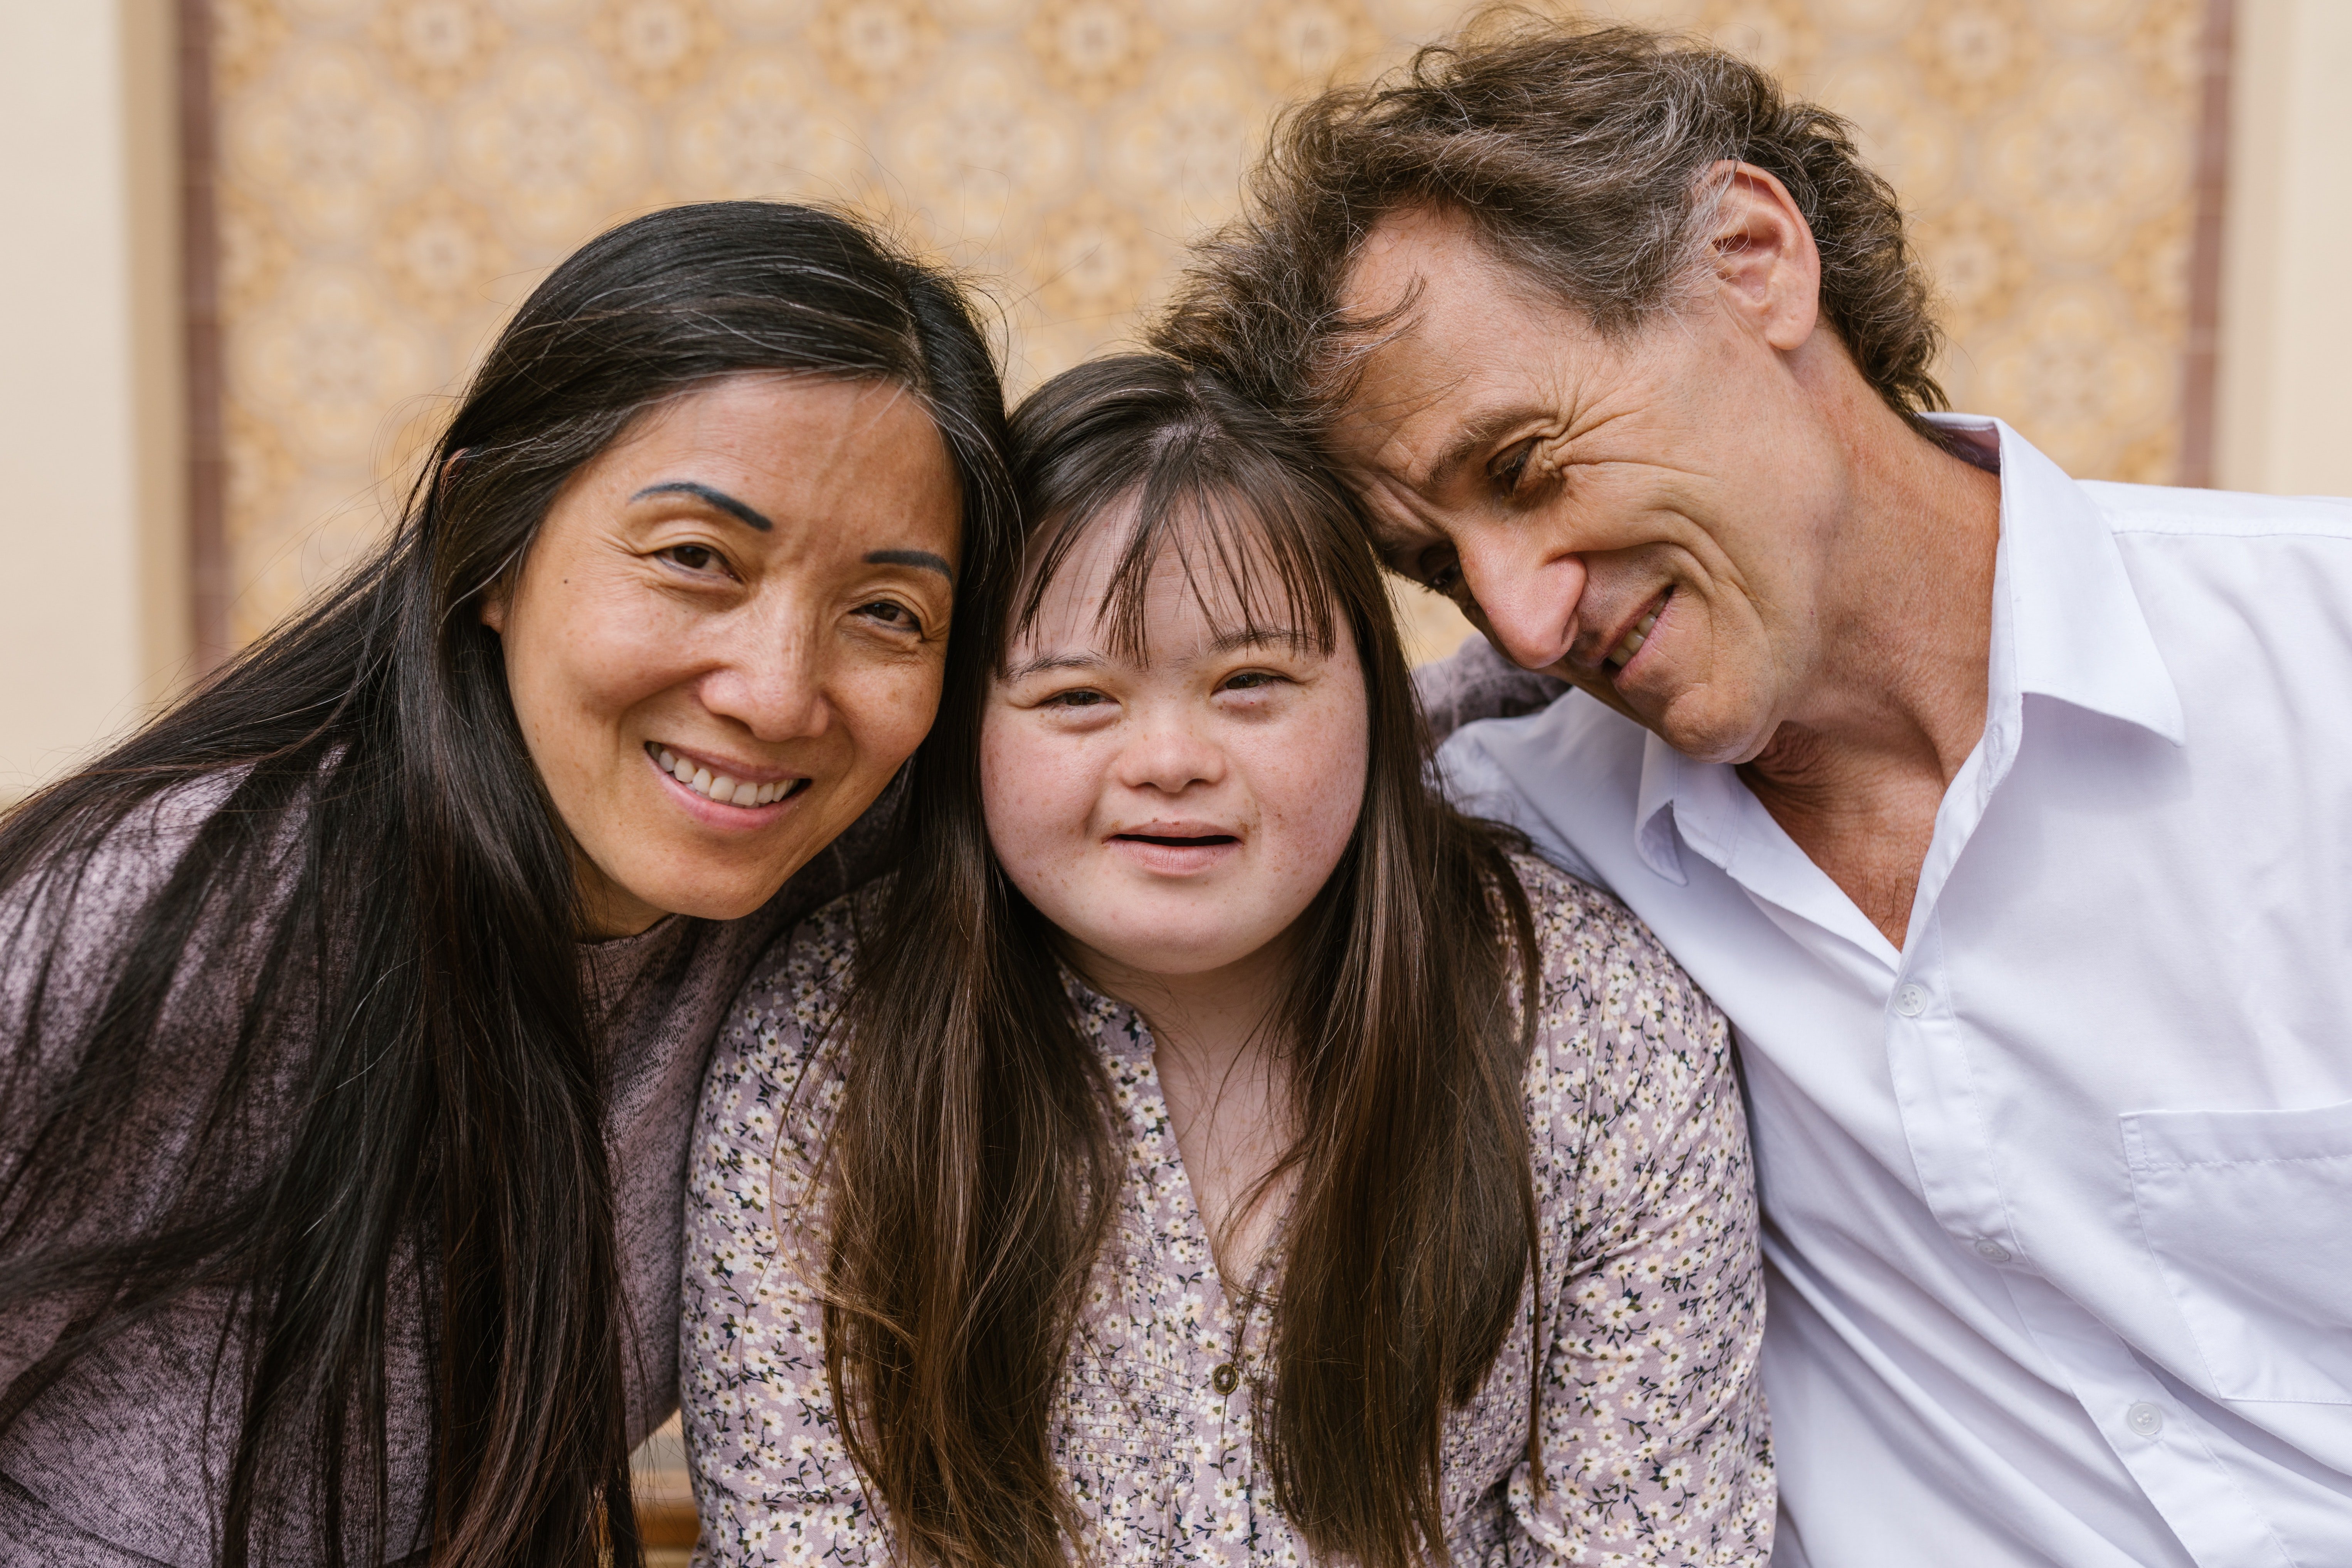 Couple with daughter | Photo: Pexels